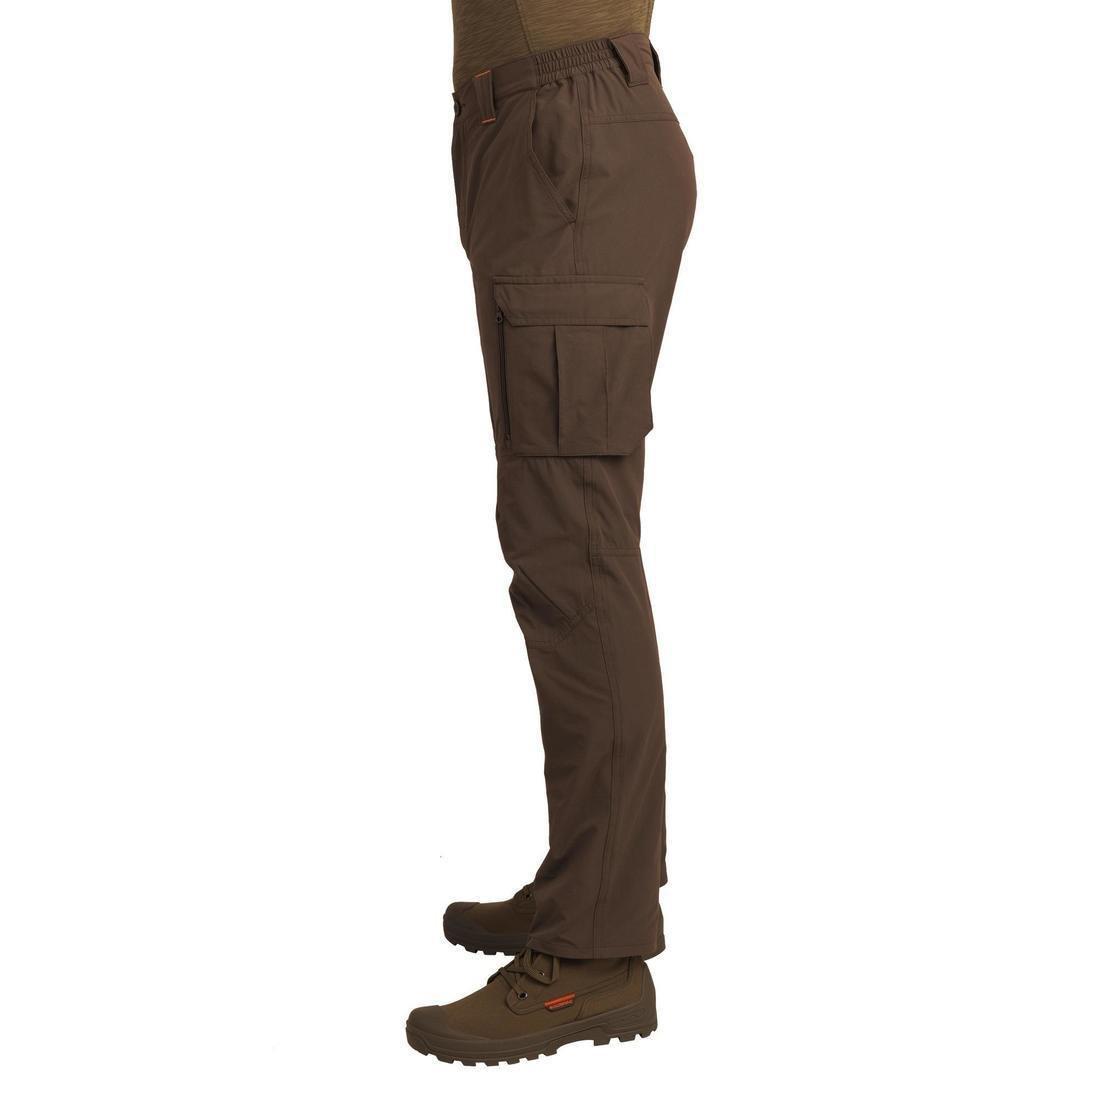 Solognac 500 Lightweight, Breathable Hunting Trousers - Kit Pest